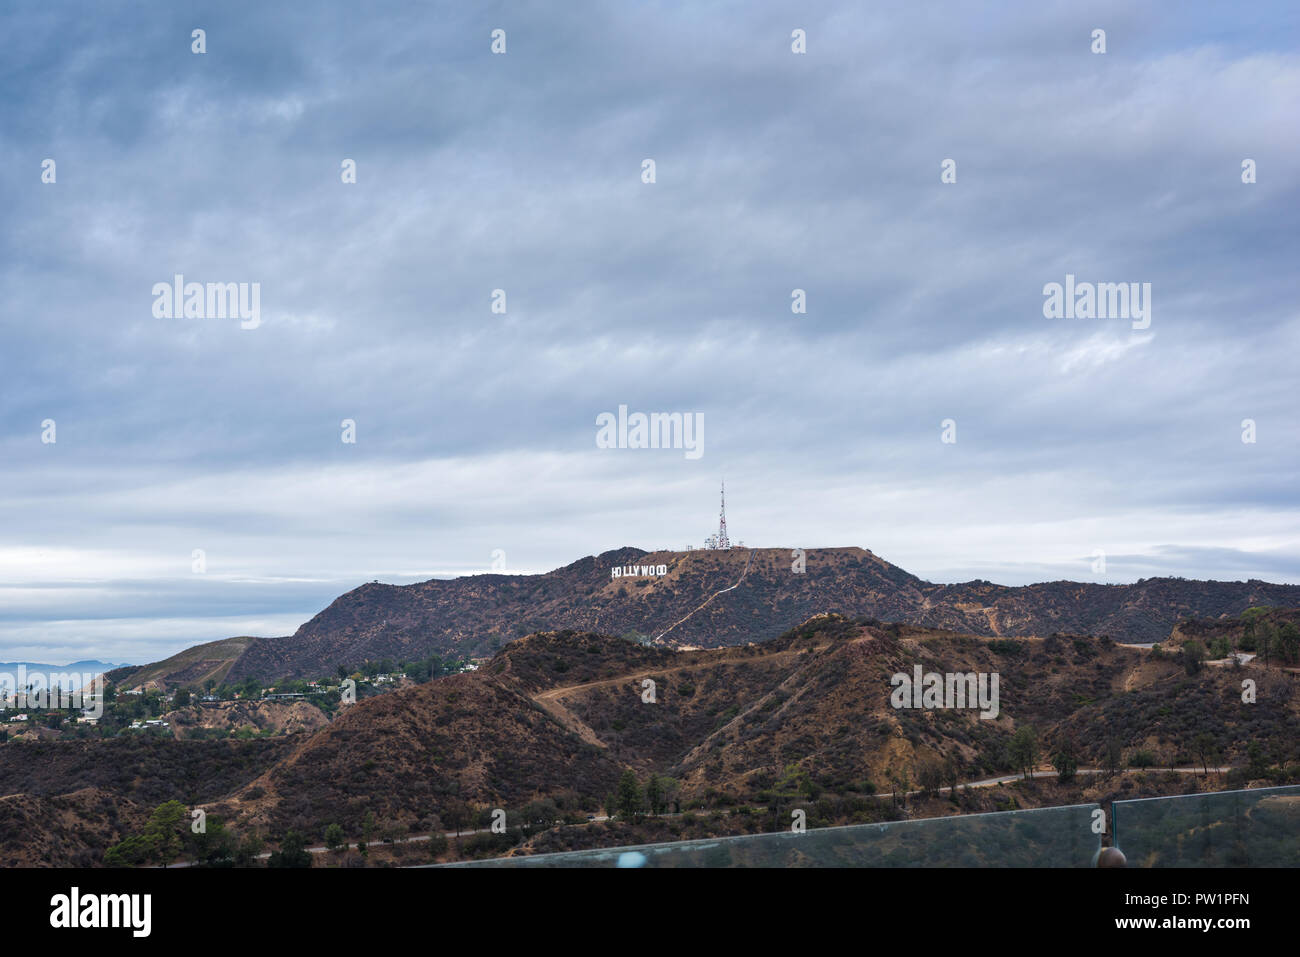 Los Angeles, CA, USA - October 28, 2016. World famous Hollywood sign under clouds Stock Photo